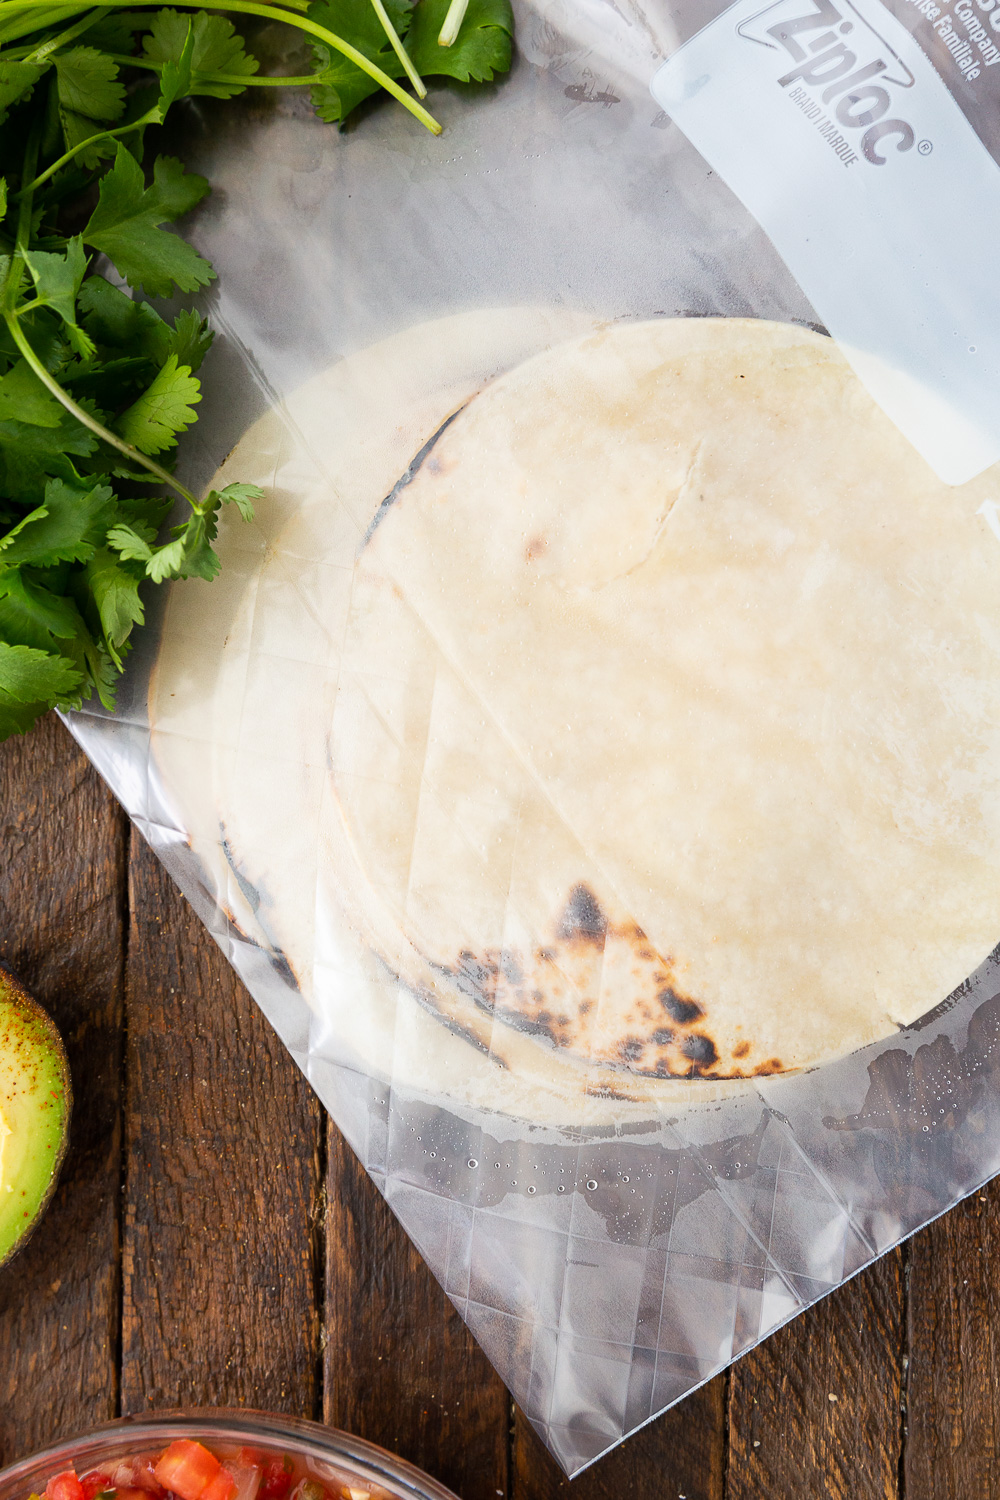 Charred and steamed tortillas made for easy chicken tacos. 